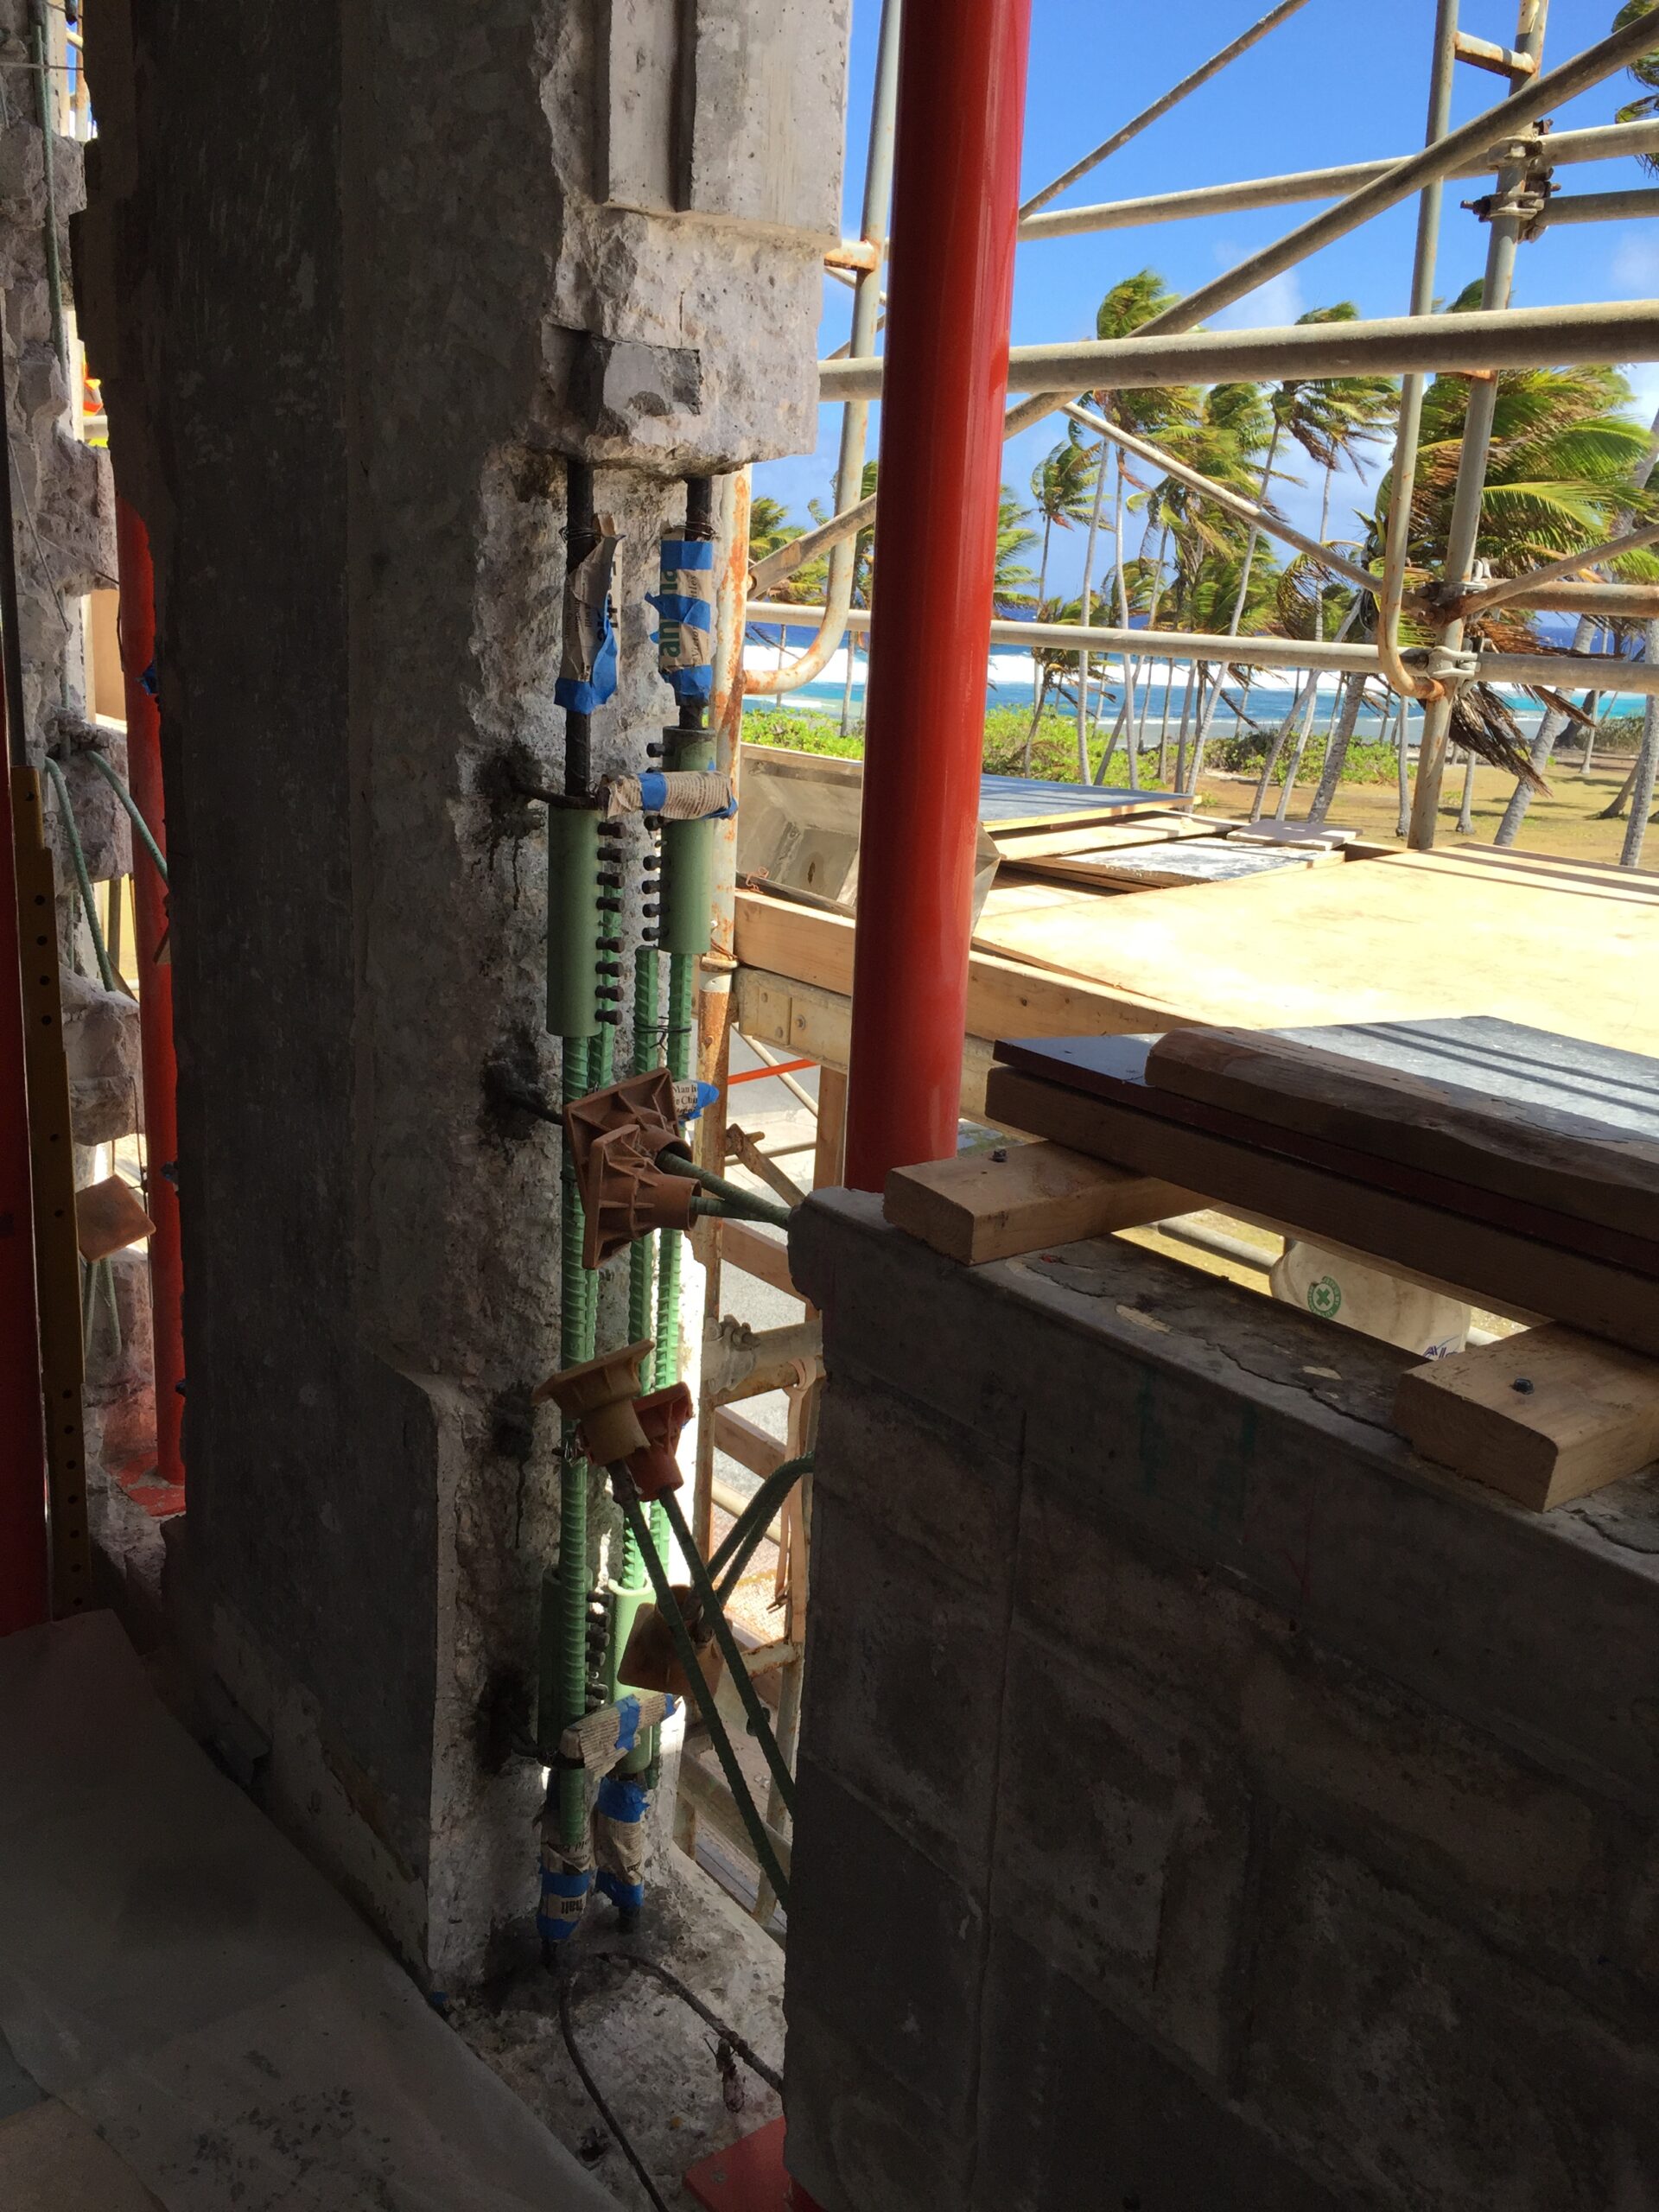 Structural Repair to Facility, Kwajalein